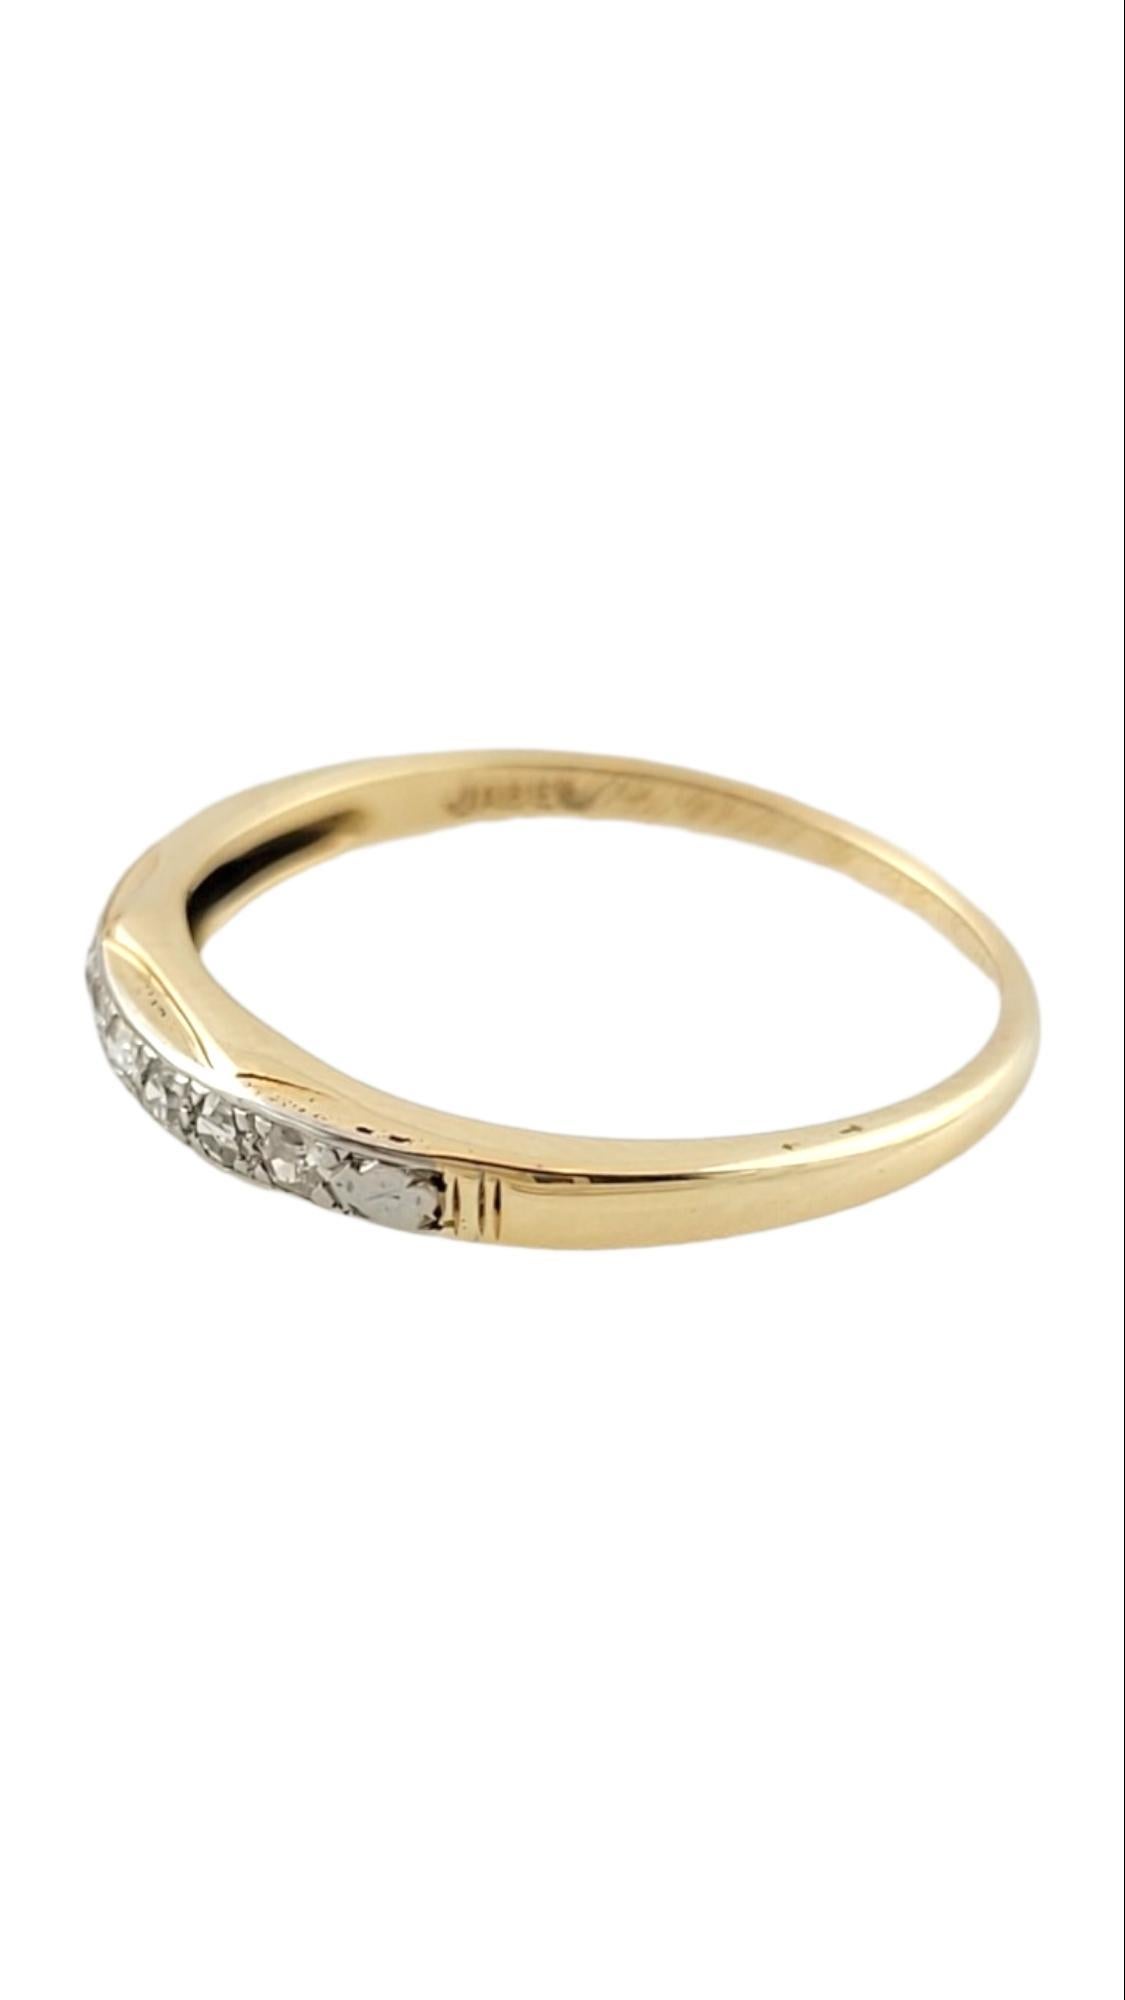 14K Yellow Gold Diamond Wedding Band Size 5.5

This gorgeous wedding ring features 7 sparkling, old single cut diamonds all set in a 14K yellow gold band!

Approximate total diamond weight: 0.07 cts

Diamond color: H-I

Diamond clarity: SI1

Size: